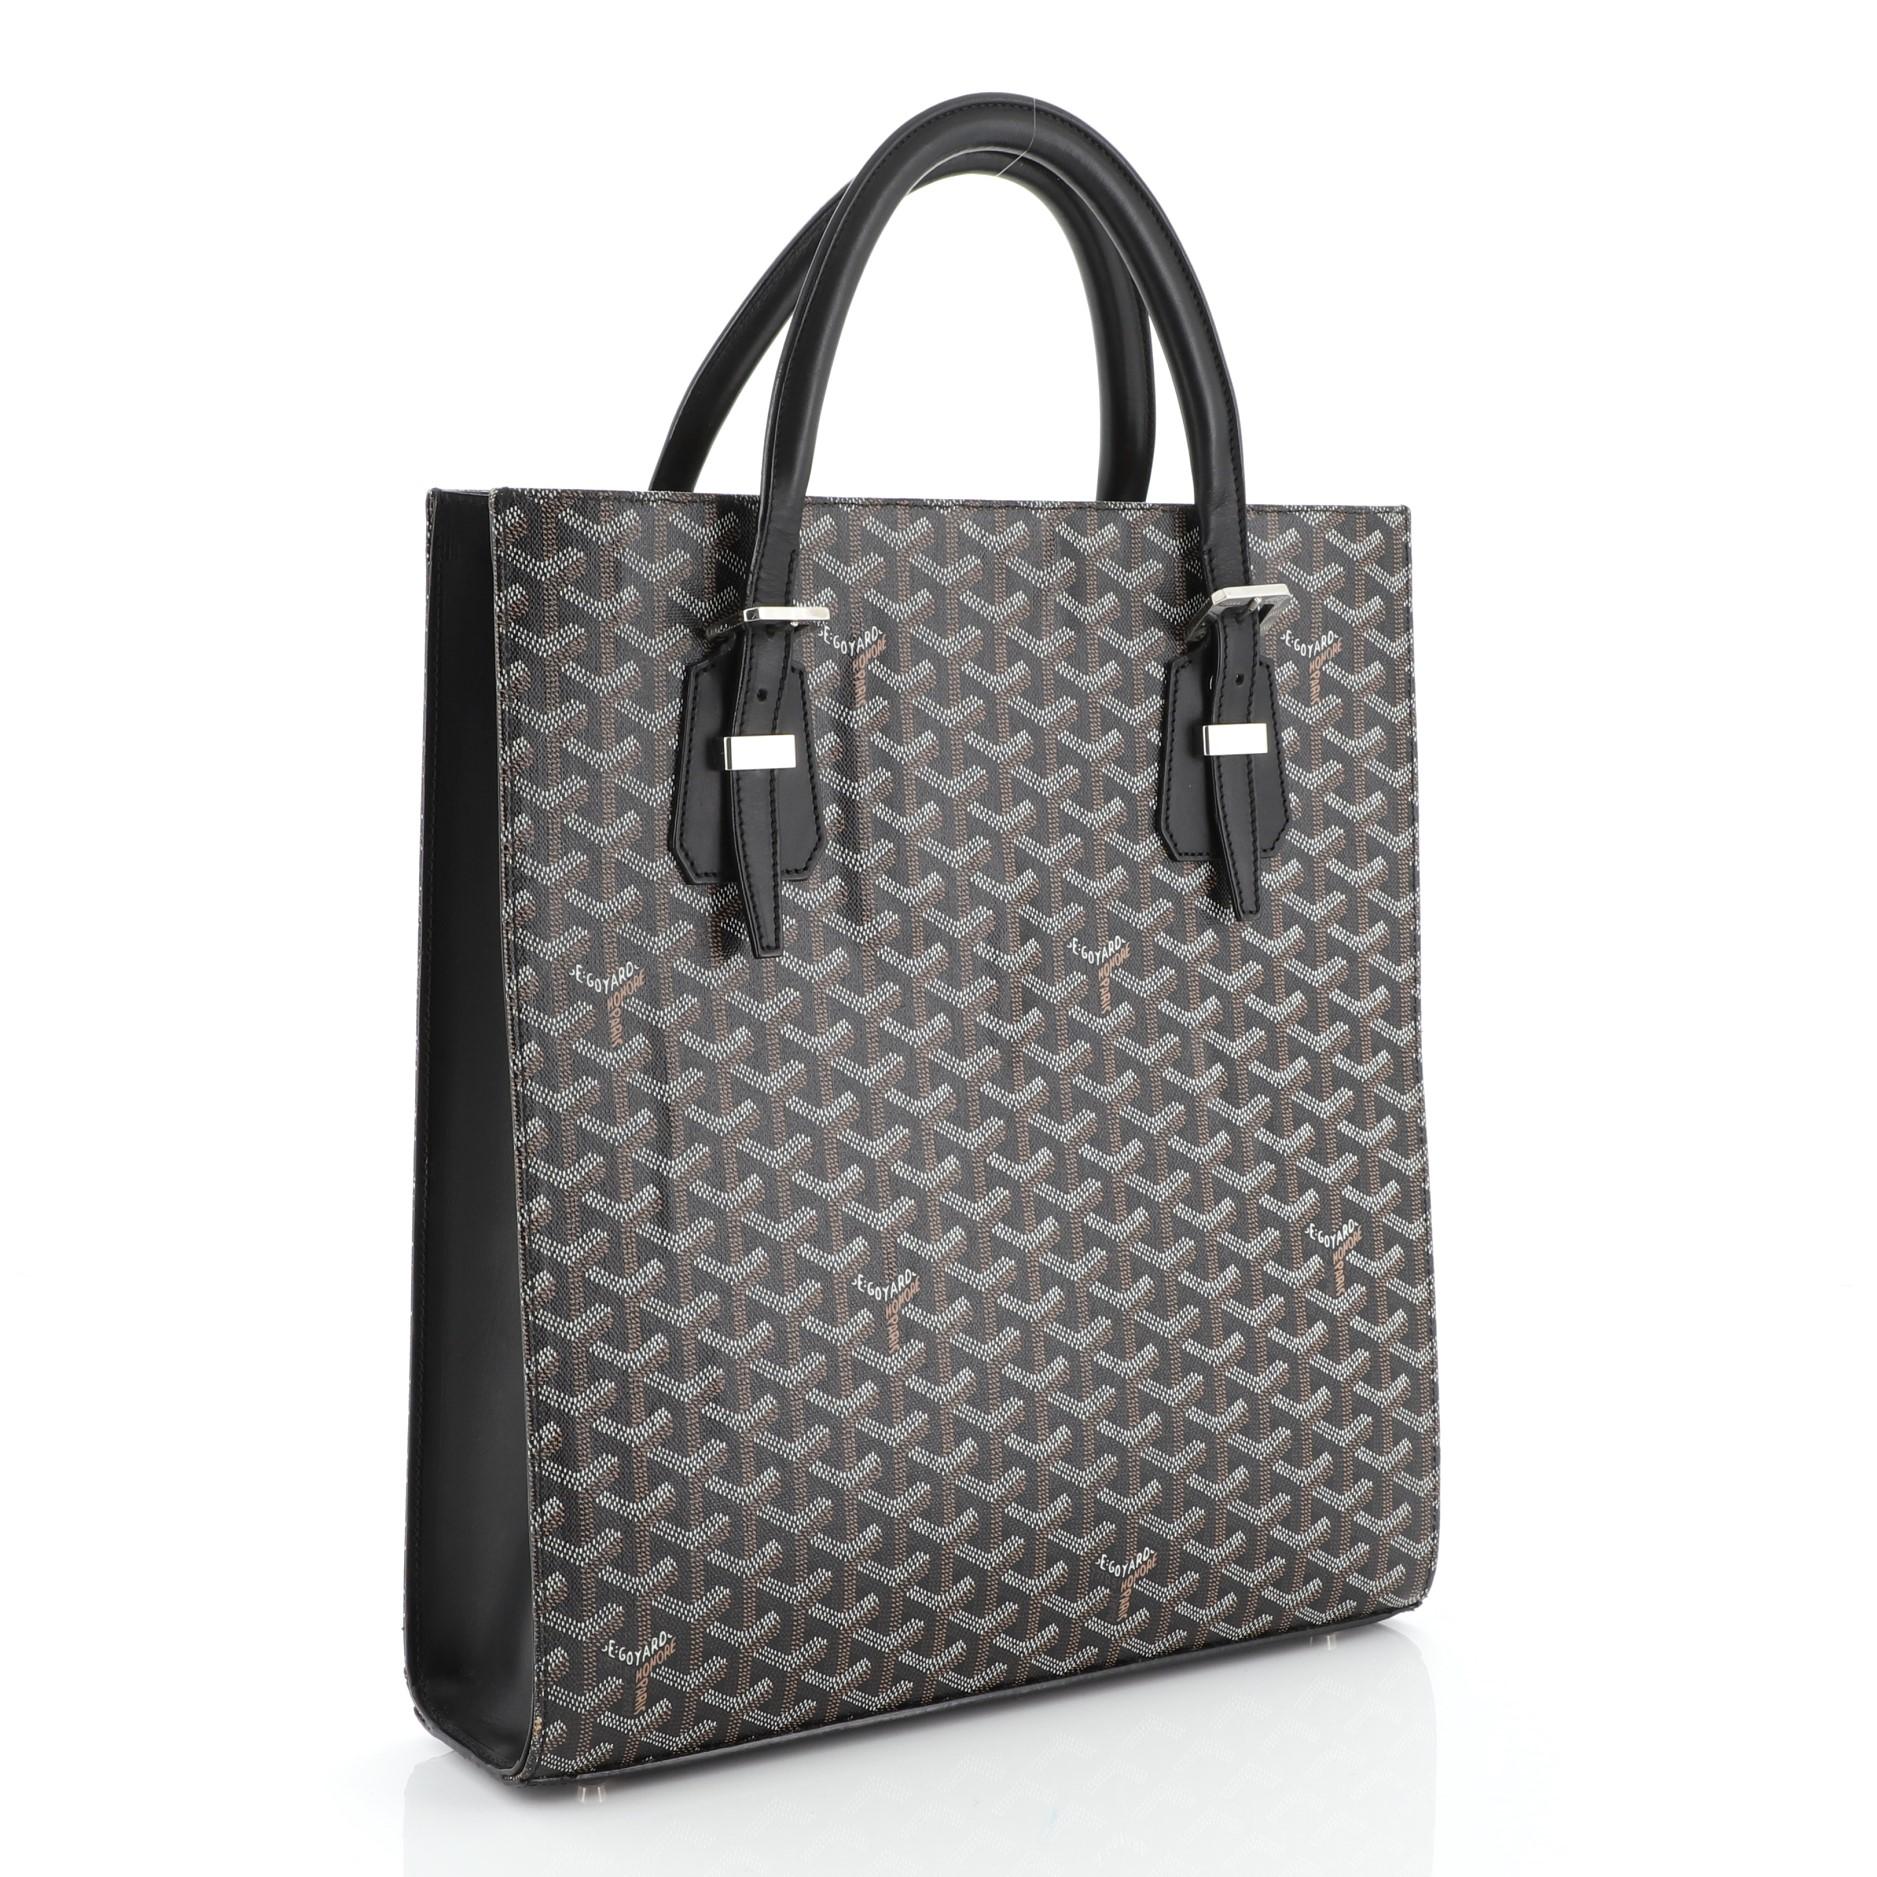 This Goyard Comores Tote Coated Canvas GM, crafted from brown coated canvas, features dual leather handles with buckle detailing, leather trim, protective base studs and silver-tone hardware. It opens to a yellow fabric interior with side zip